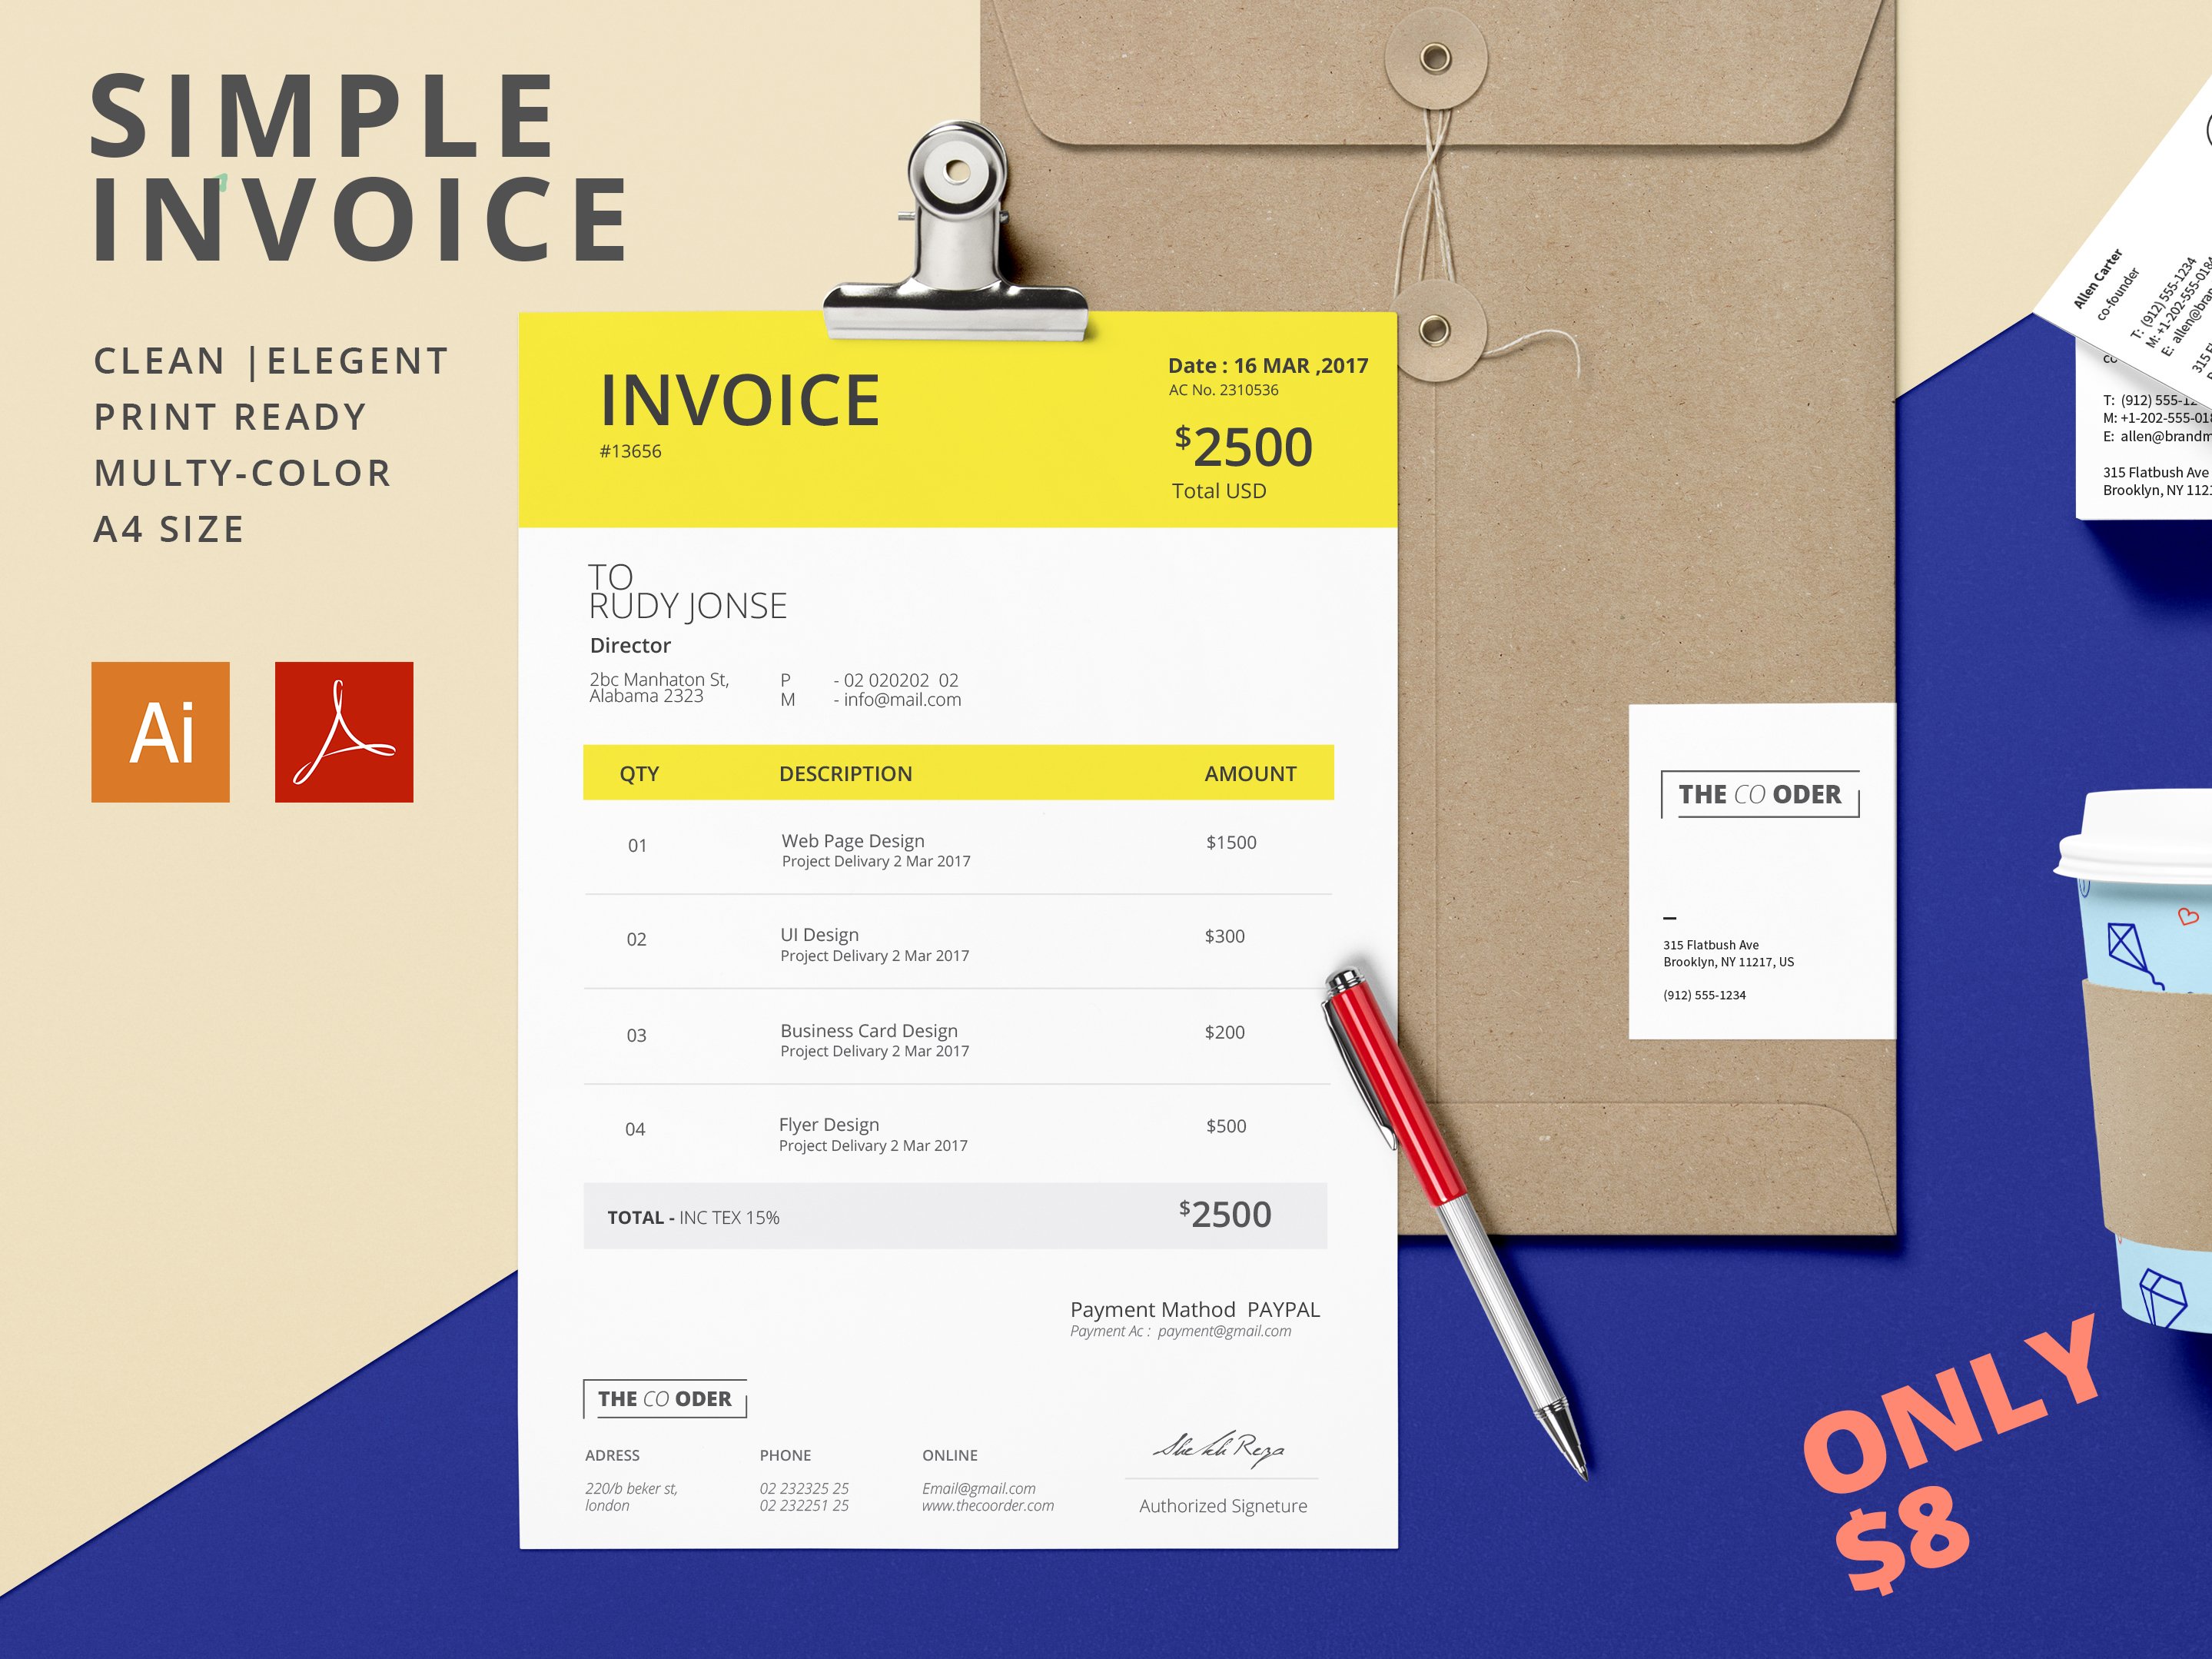 Simple Invoice | Invoice Template cover image.